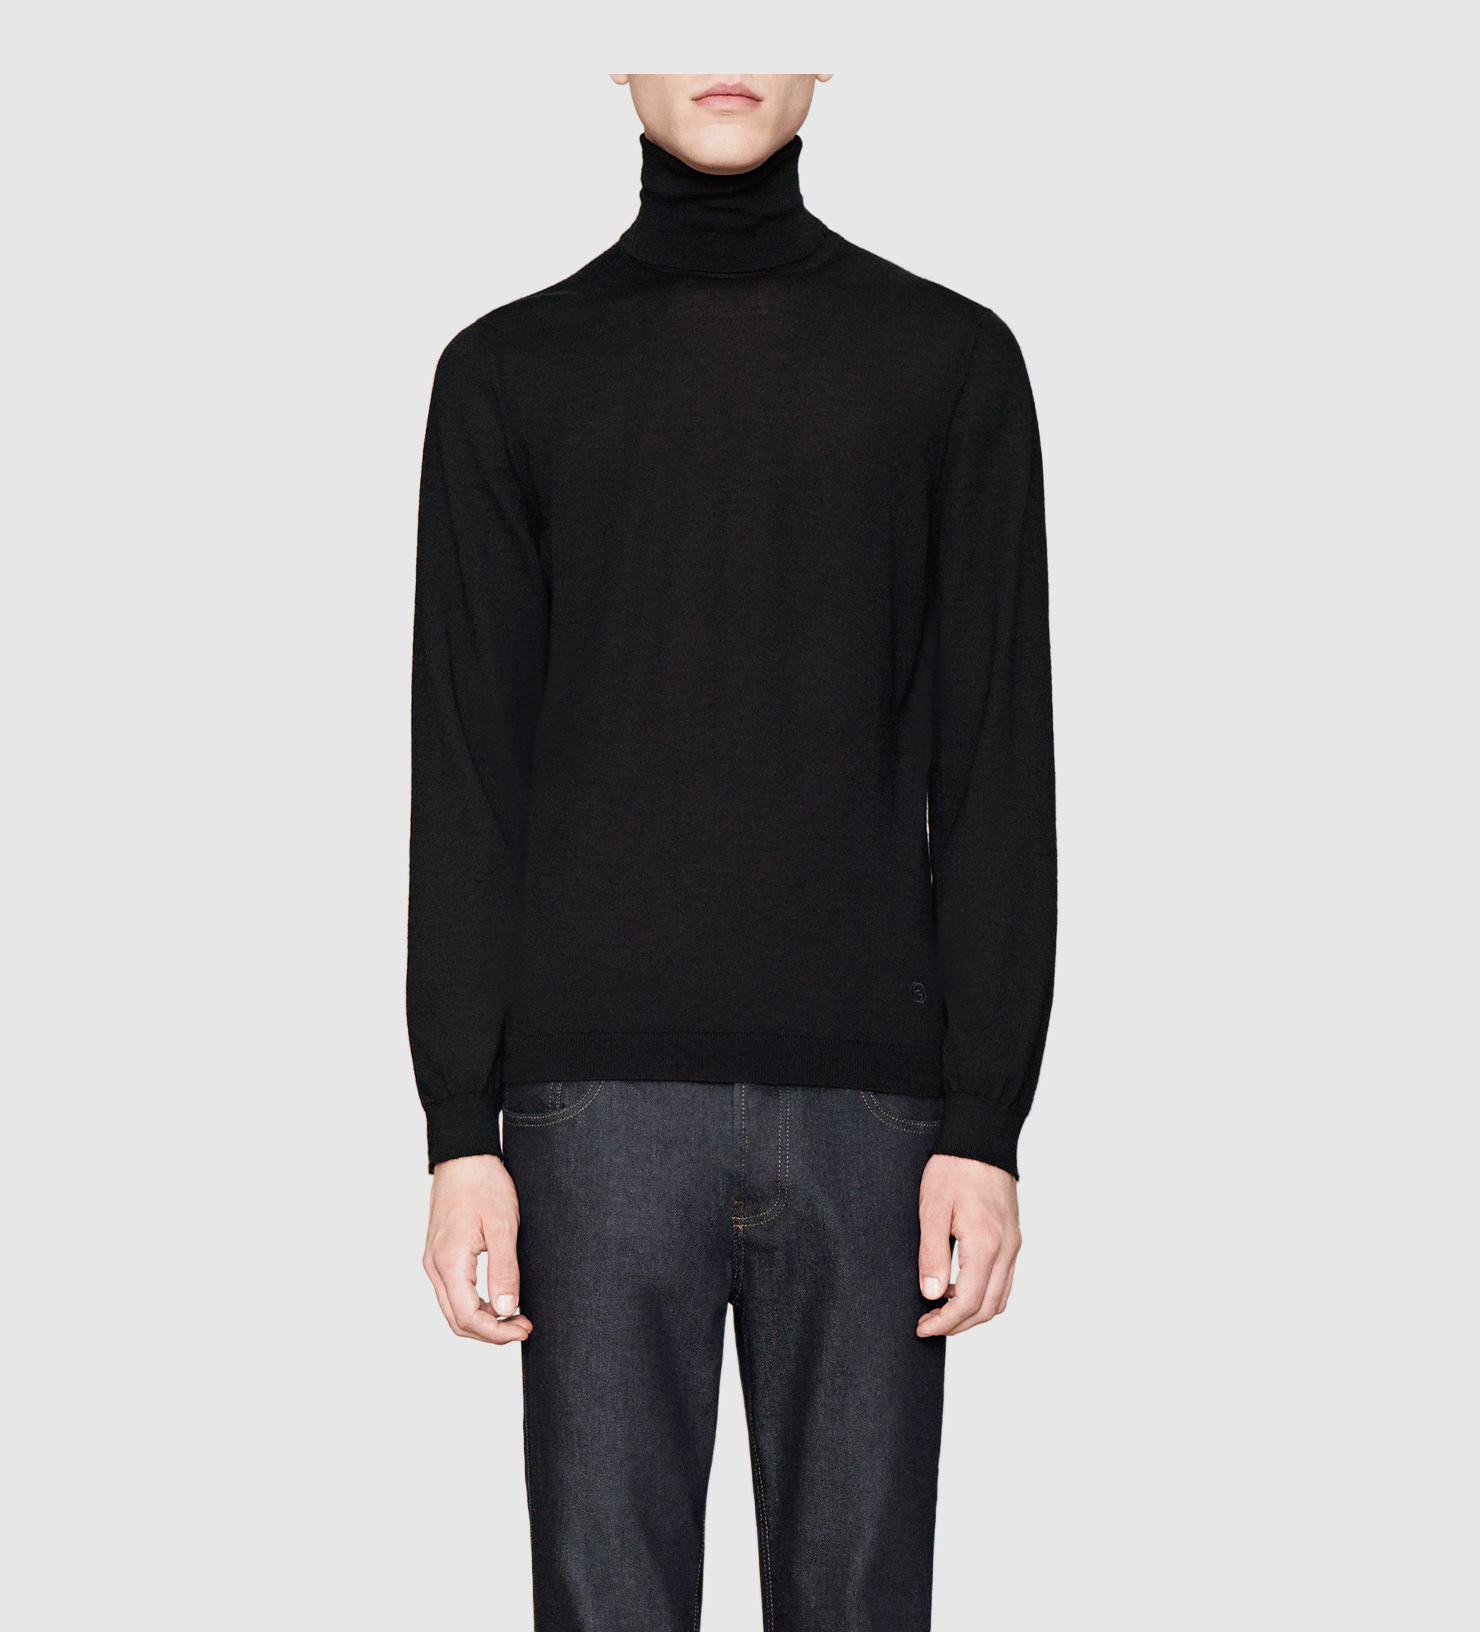 Gucci Cashmere Turtleneck Sweater in Black for Men - Lyst